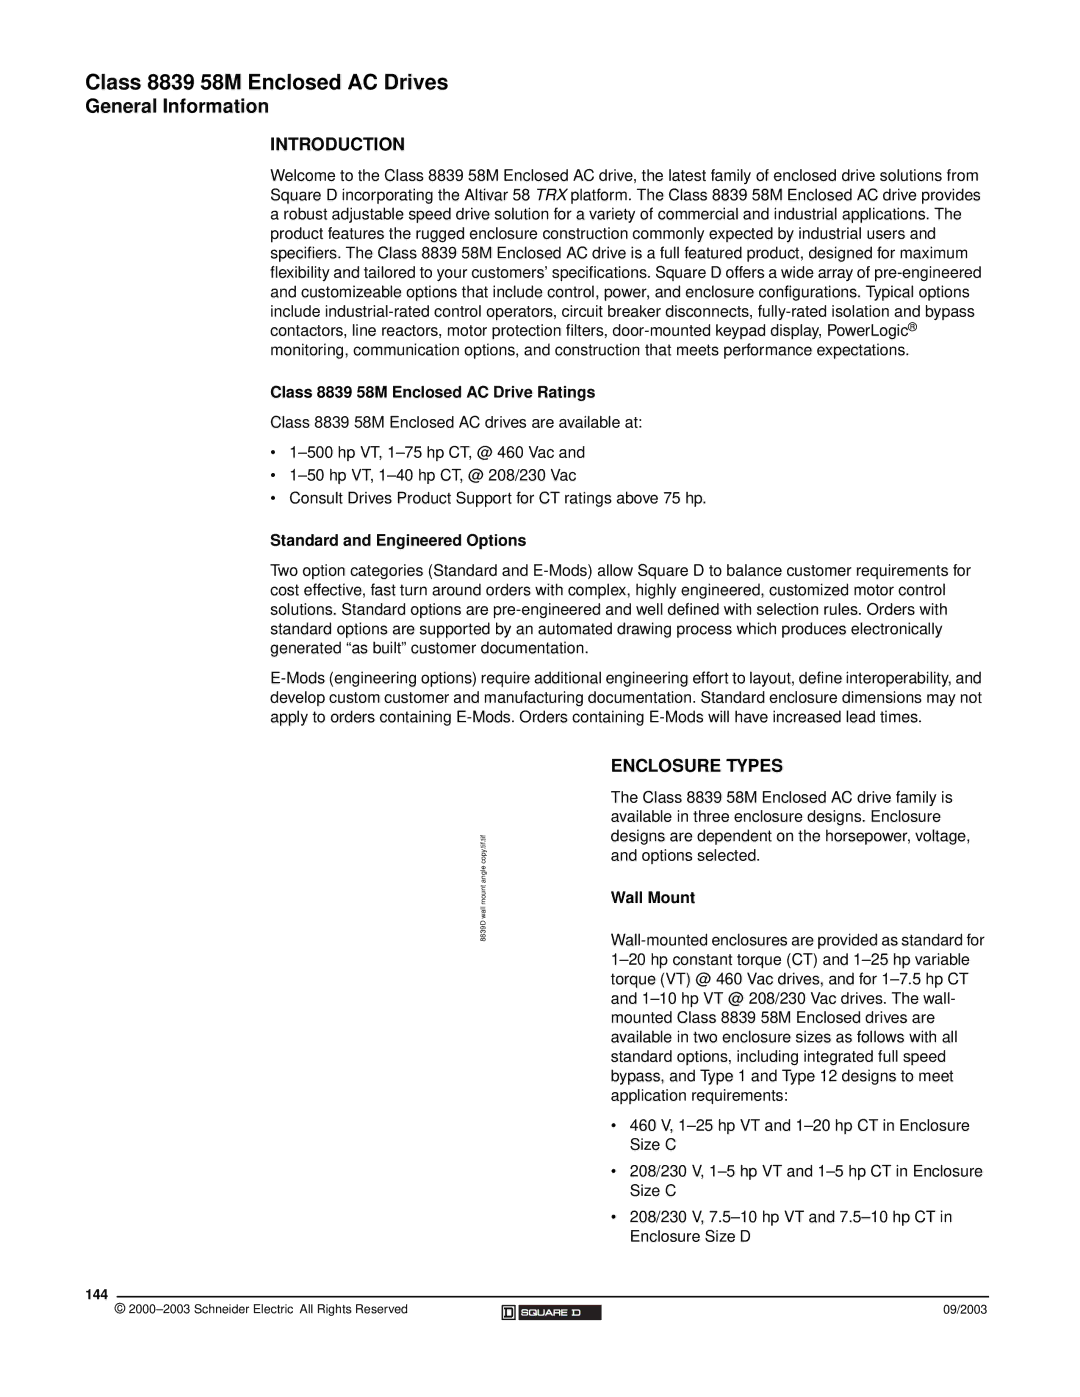 Schneider Electric 58 TRX manual General Information, Introduction, Enclosure Types 